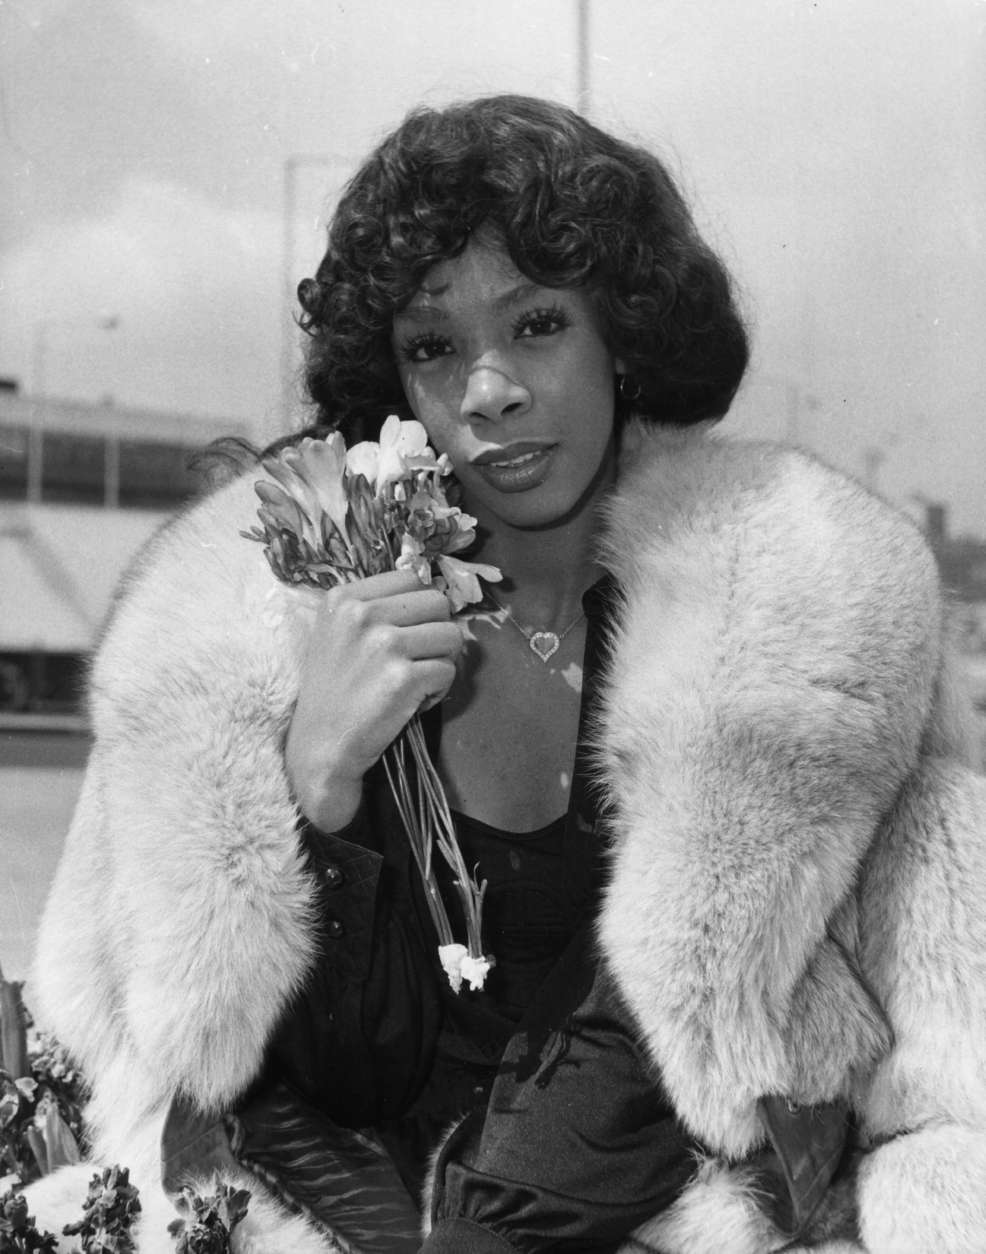 Donna Summer's landmark hit "Love to Love You baby" was an upfront statement of black female sexuality like few heard before. (Getty Images/Keystone)